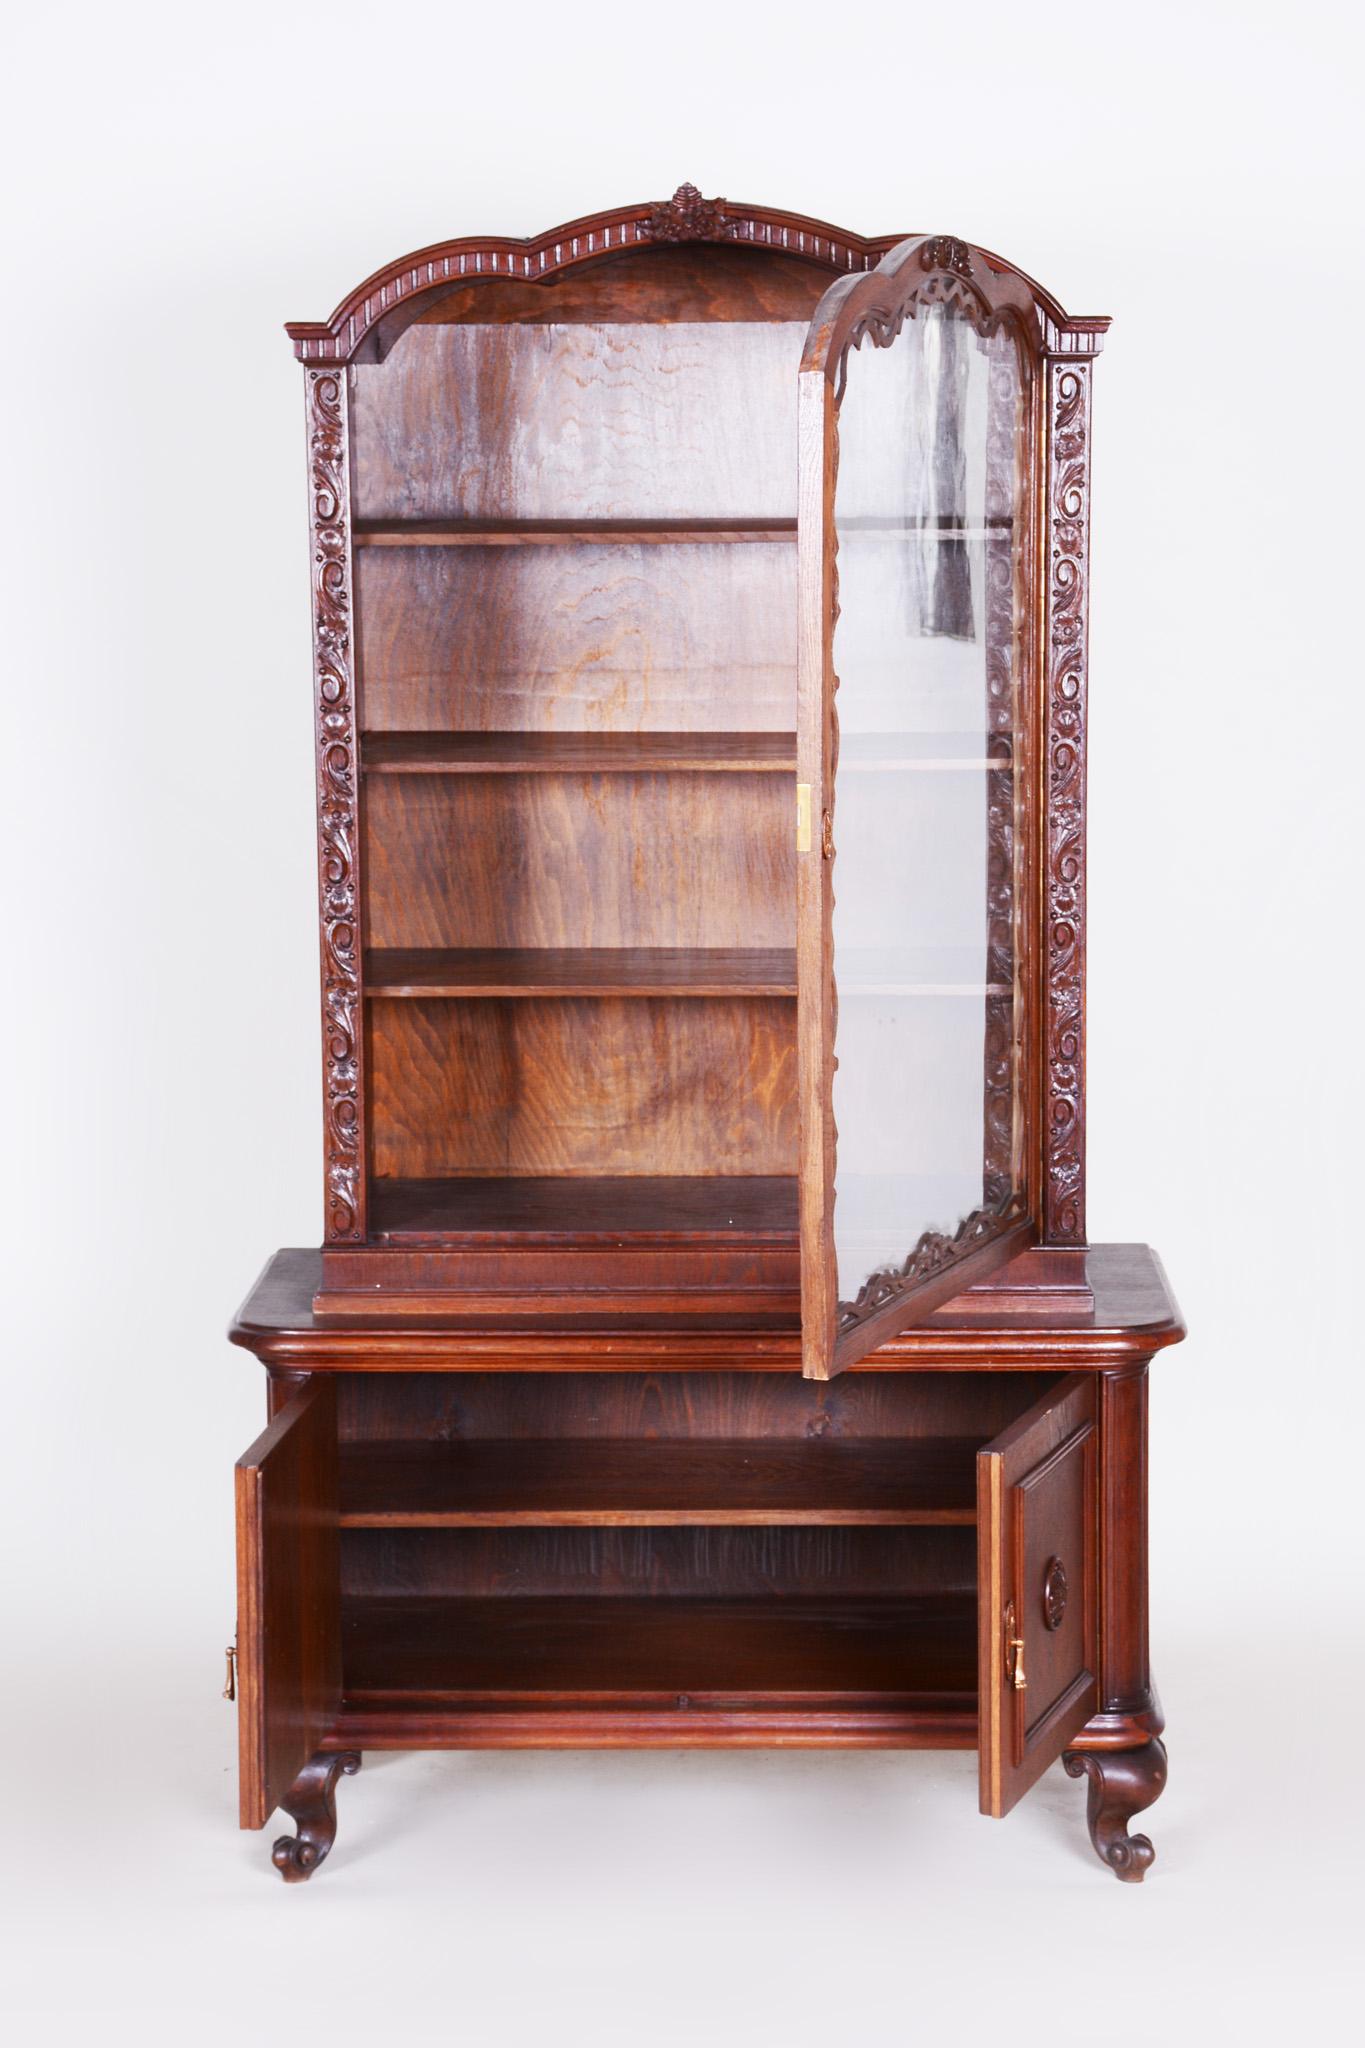 Completely Restored Art Deco Brown Oak Display Cabinet, Czechia, 1920s In Good Condition For Sale In Horomerice, CZ